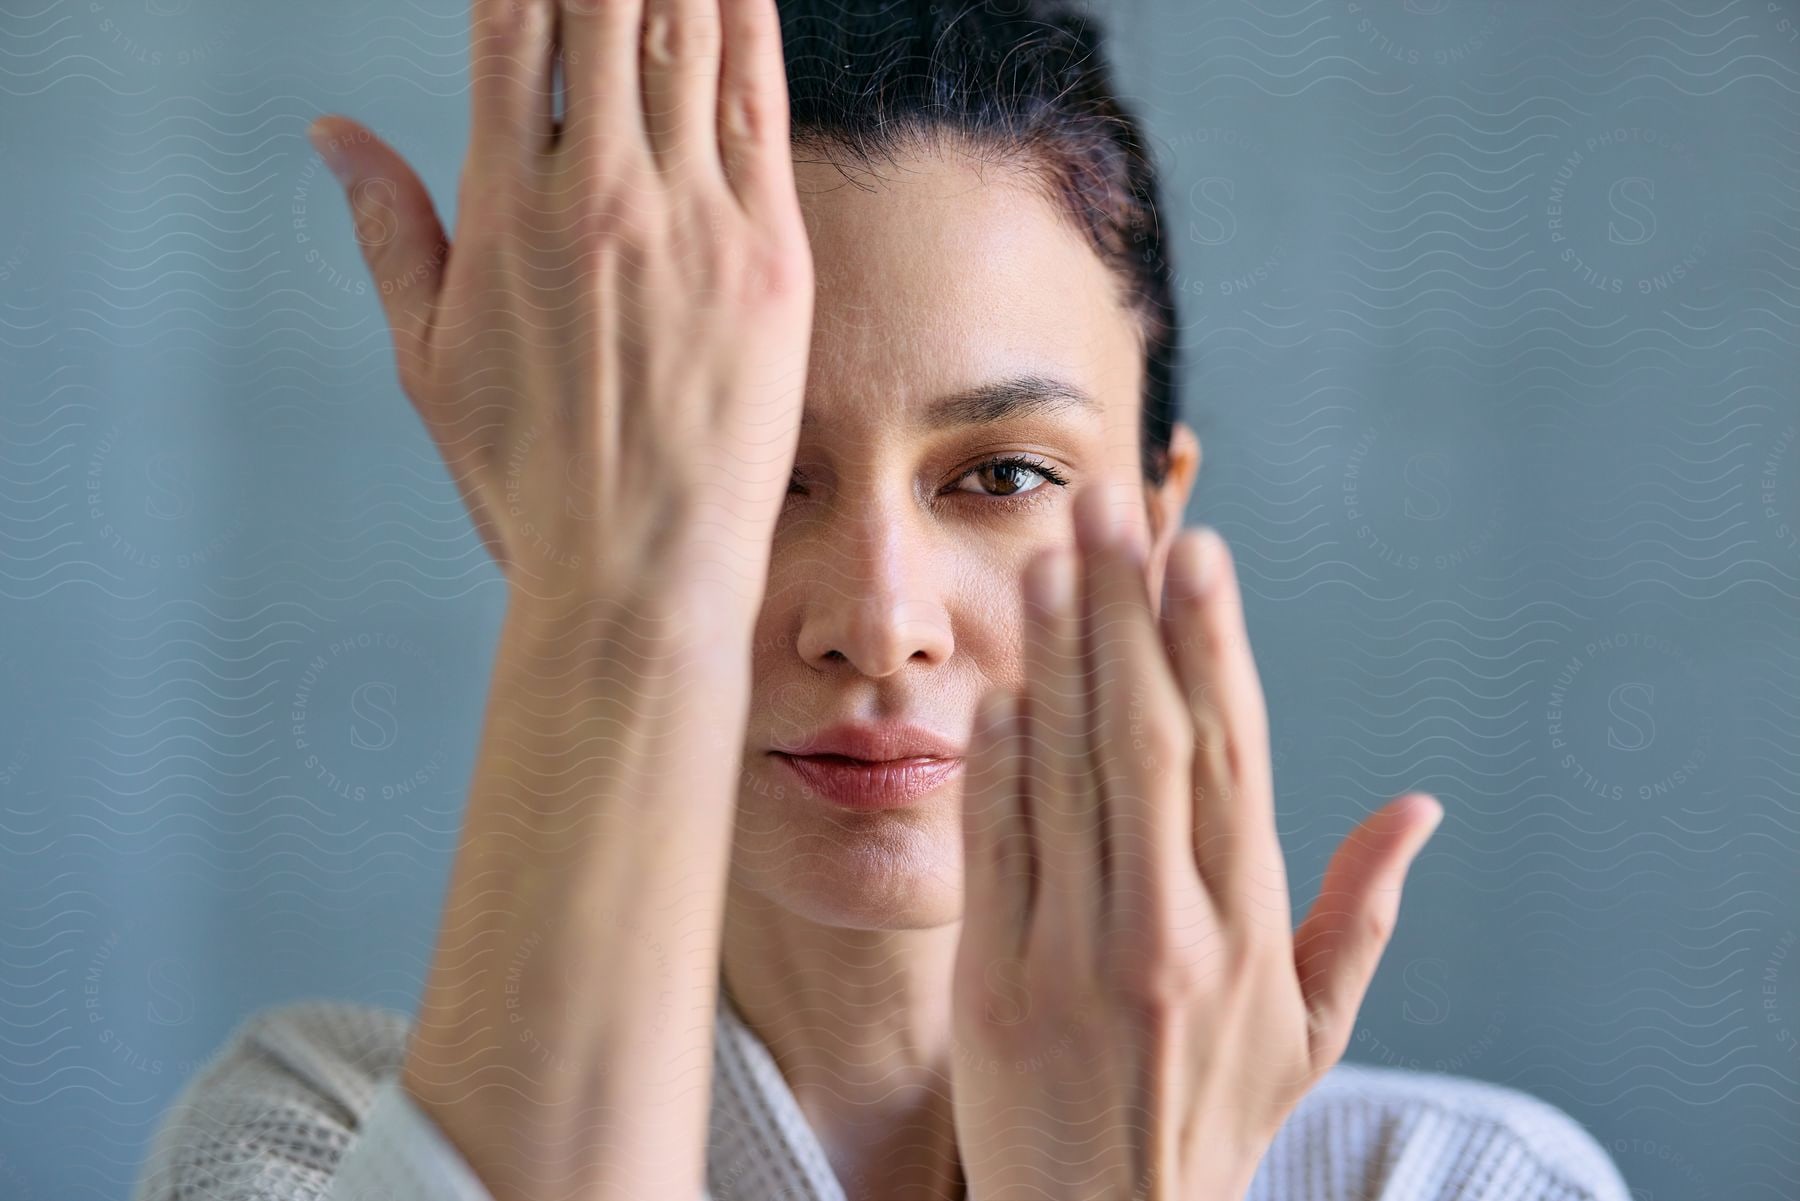 A woman wearing a bathrobe holds her hands up against her face in the bathroom